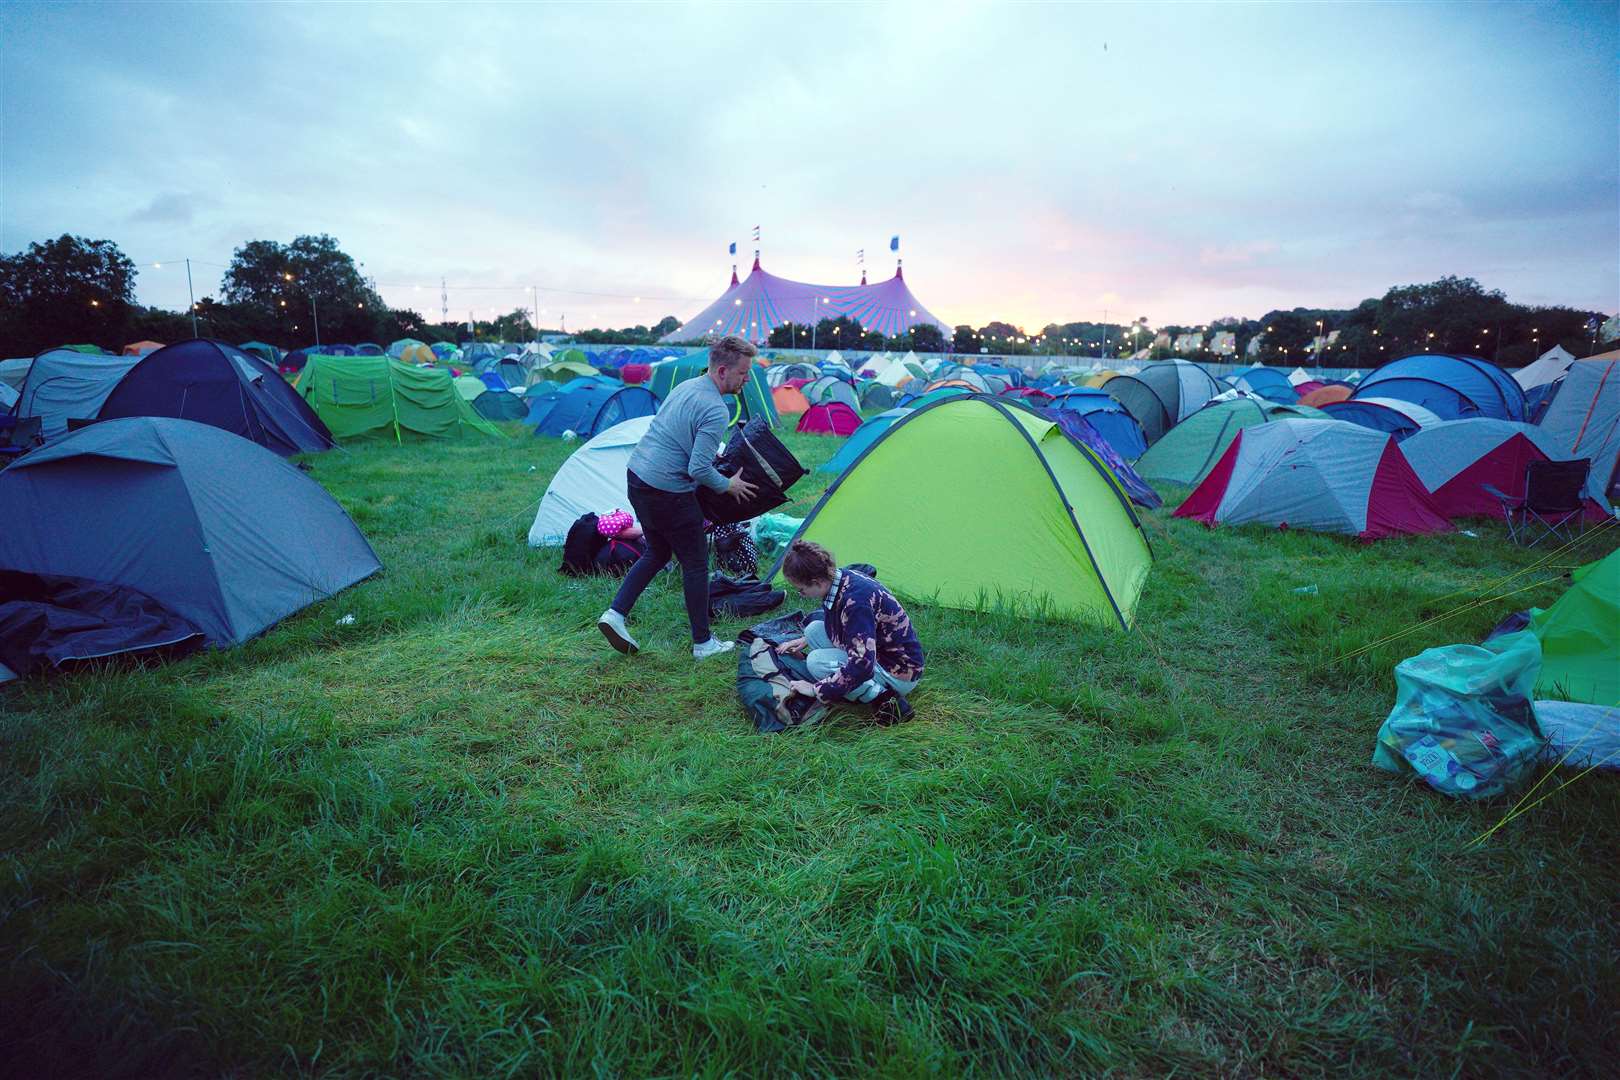 Festival-goers pack away their pitch (Ben Birchall/PA)